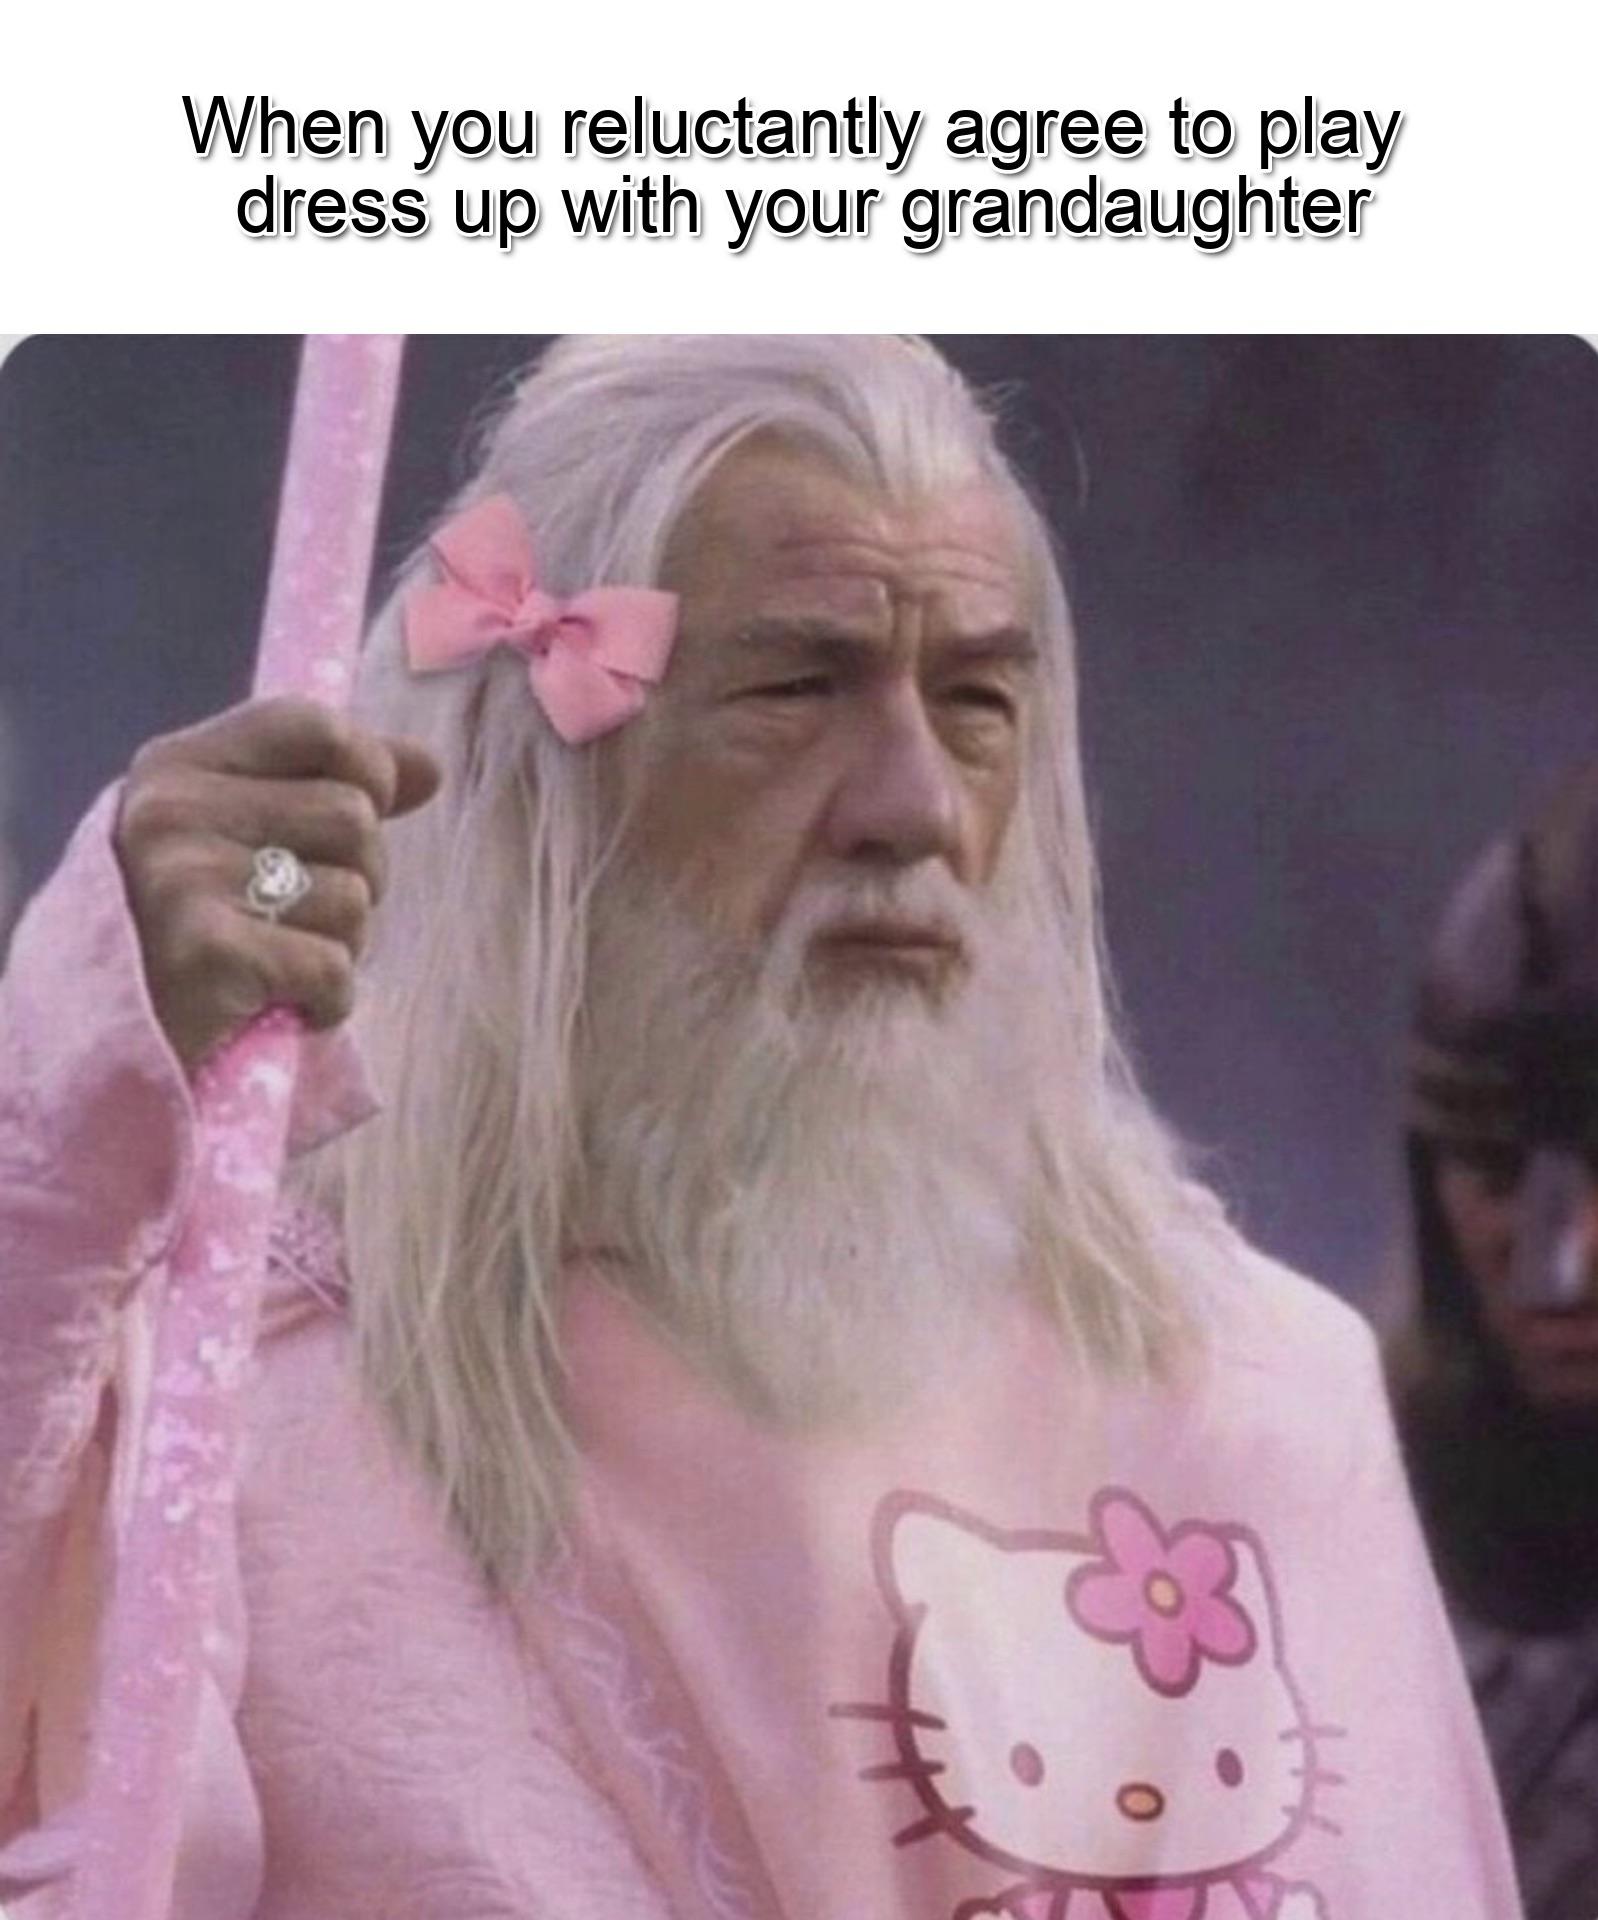 dank memes - funny memes - lord of the rings gandalf - When you reluctantly agree to play dress up with your grandaughter